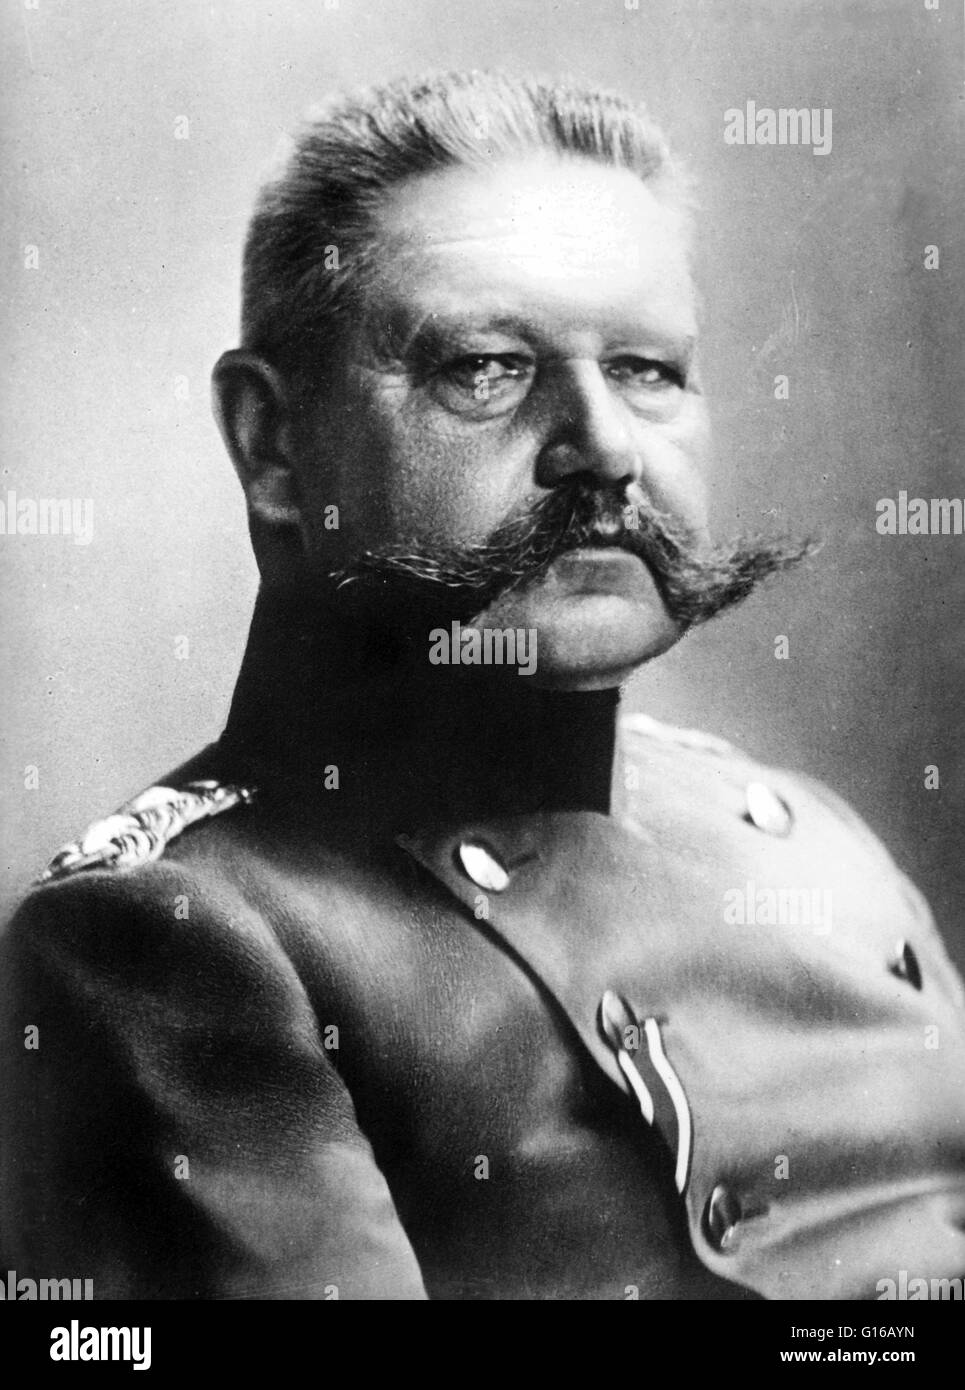 Paul Ludwig Hans Anton von Beneckendorff und von Hindenburg (October 2, 1847 - August 2, 1934) was a Prussian-German field marshal, statesman, and politician, and served as the second President of Germany from 1925 to 1934. He enjoyed a long career in the Stock Photo